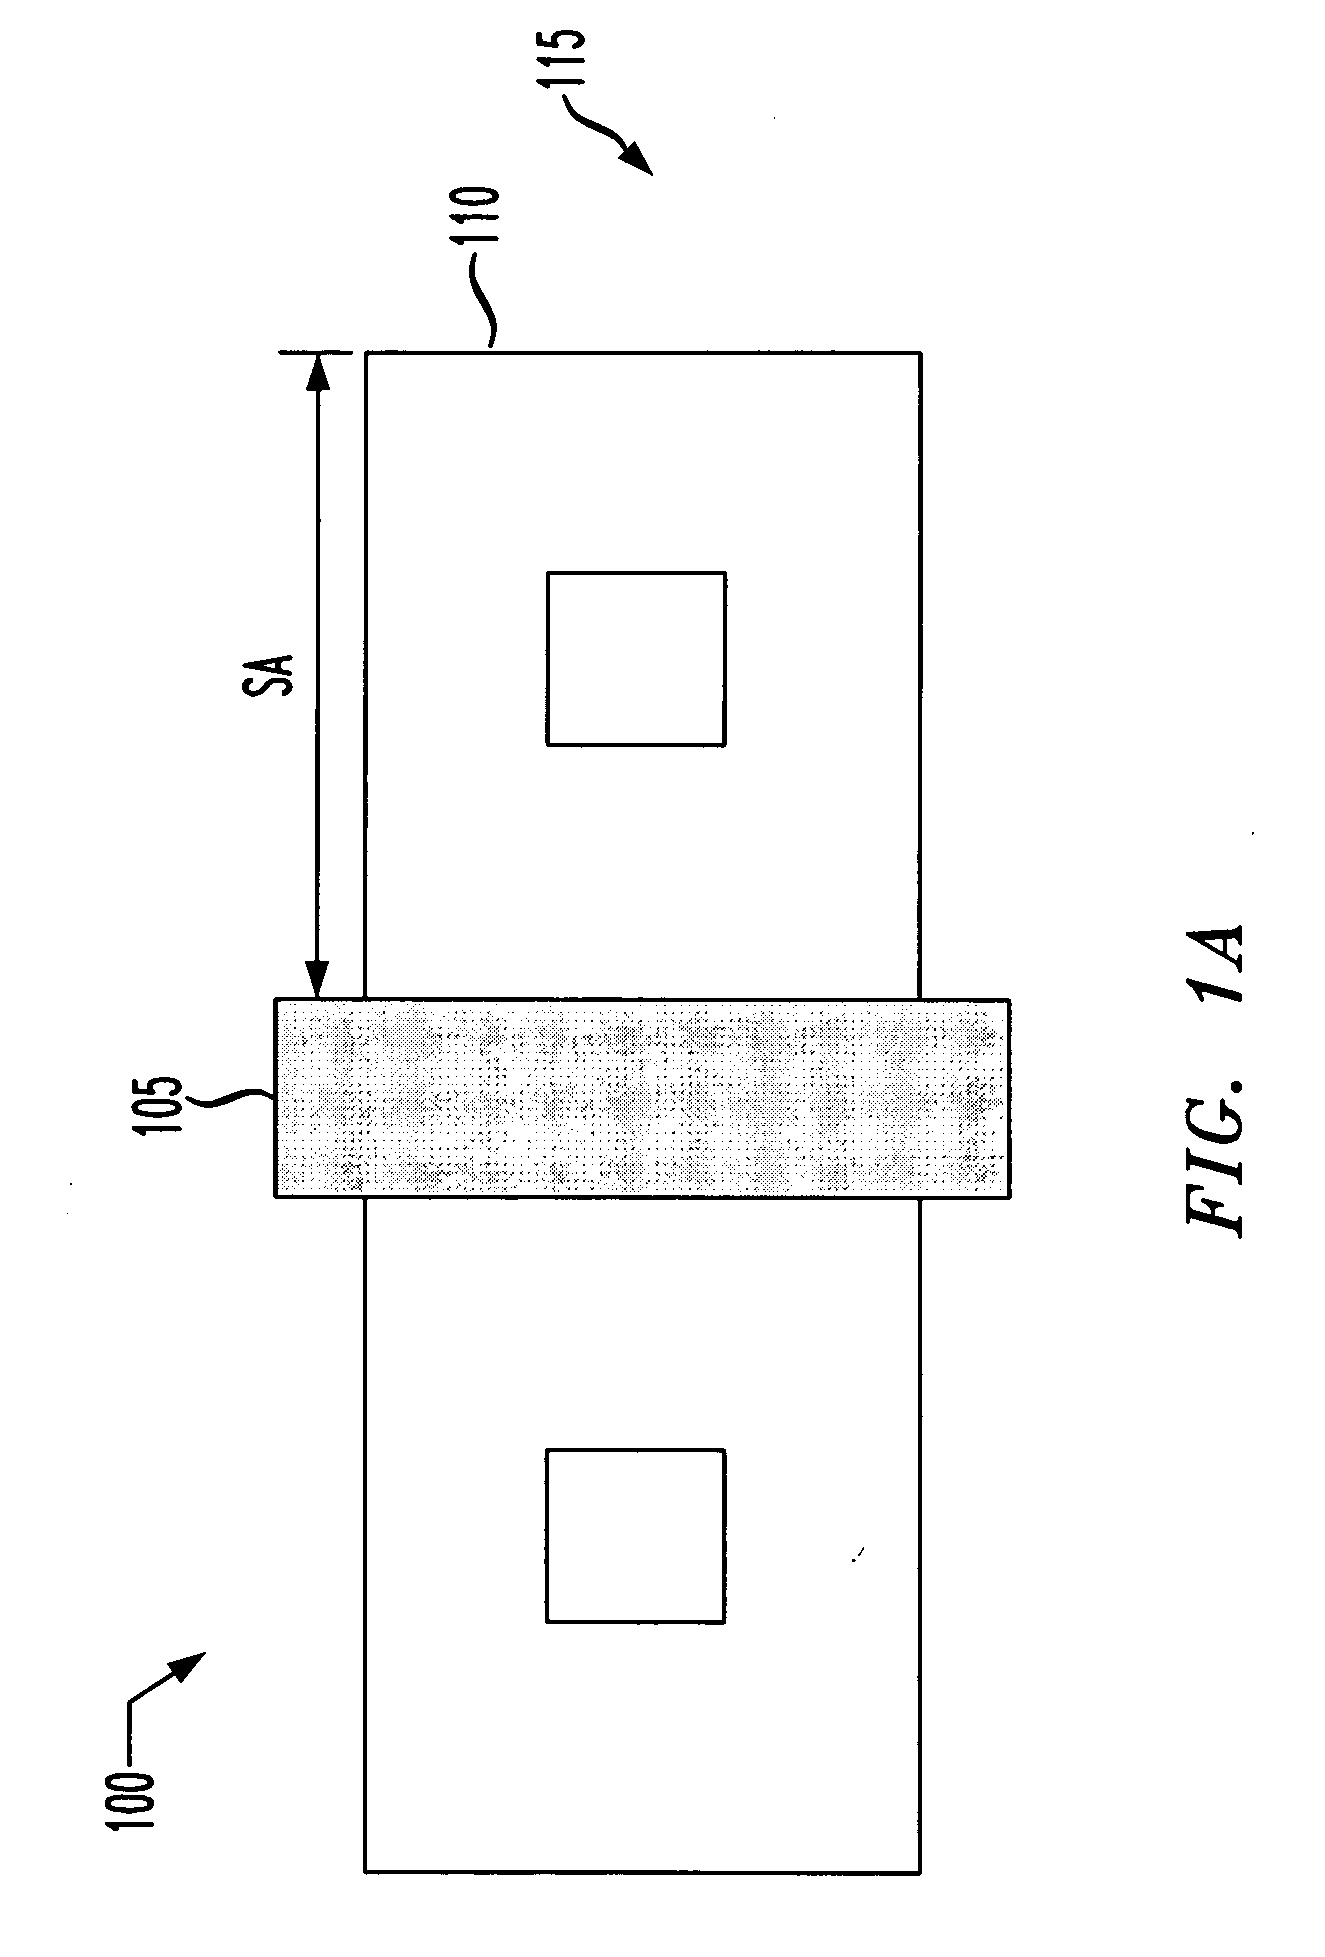 Method of making a semiconductor device by balancing shallow trench isolation stress and optical proximity effects